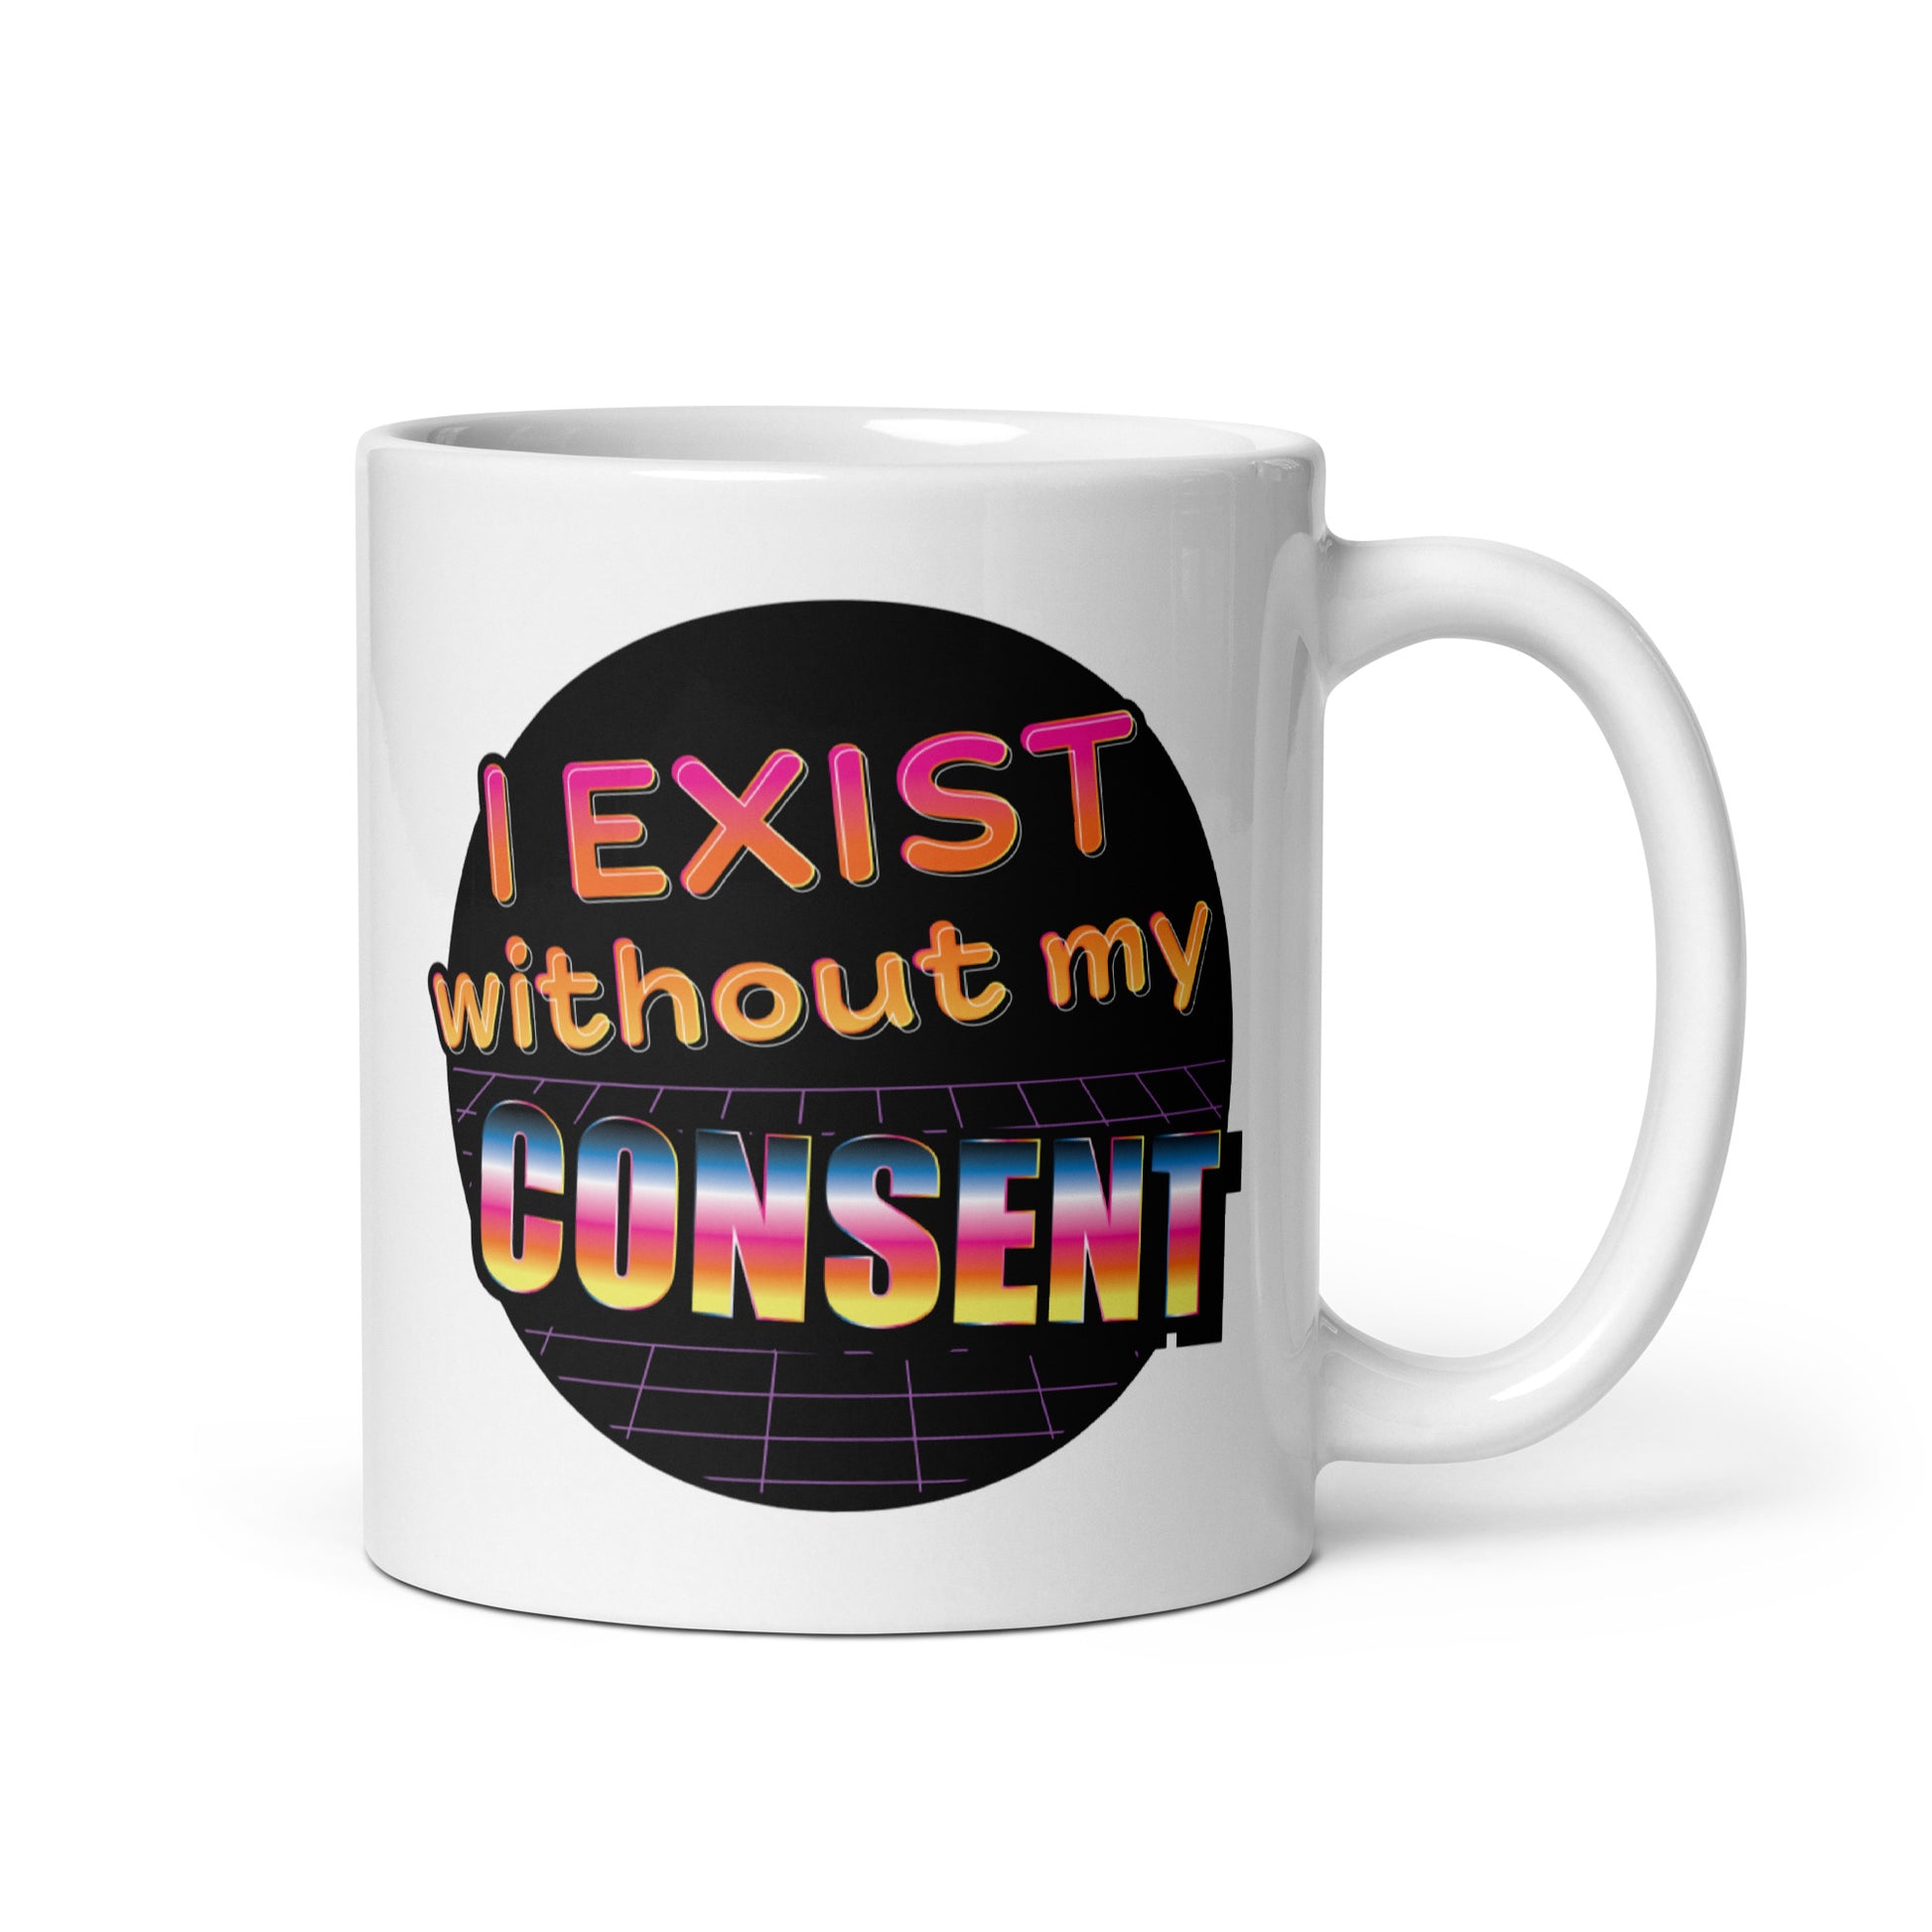 A white 11 ounce ceramic mug featuring a brightly colored 80's style graphic with colorful text that reads "I exist without my consent"